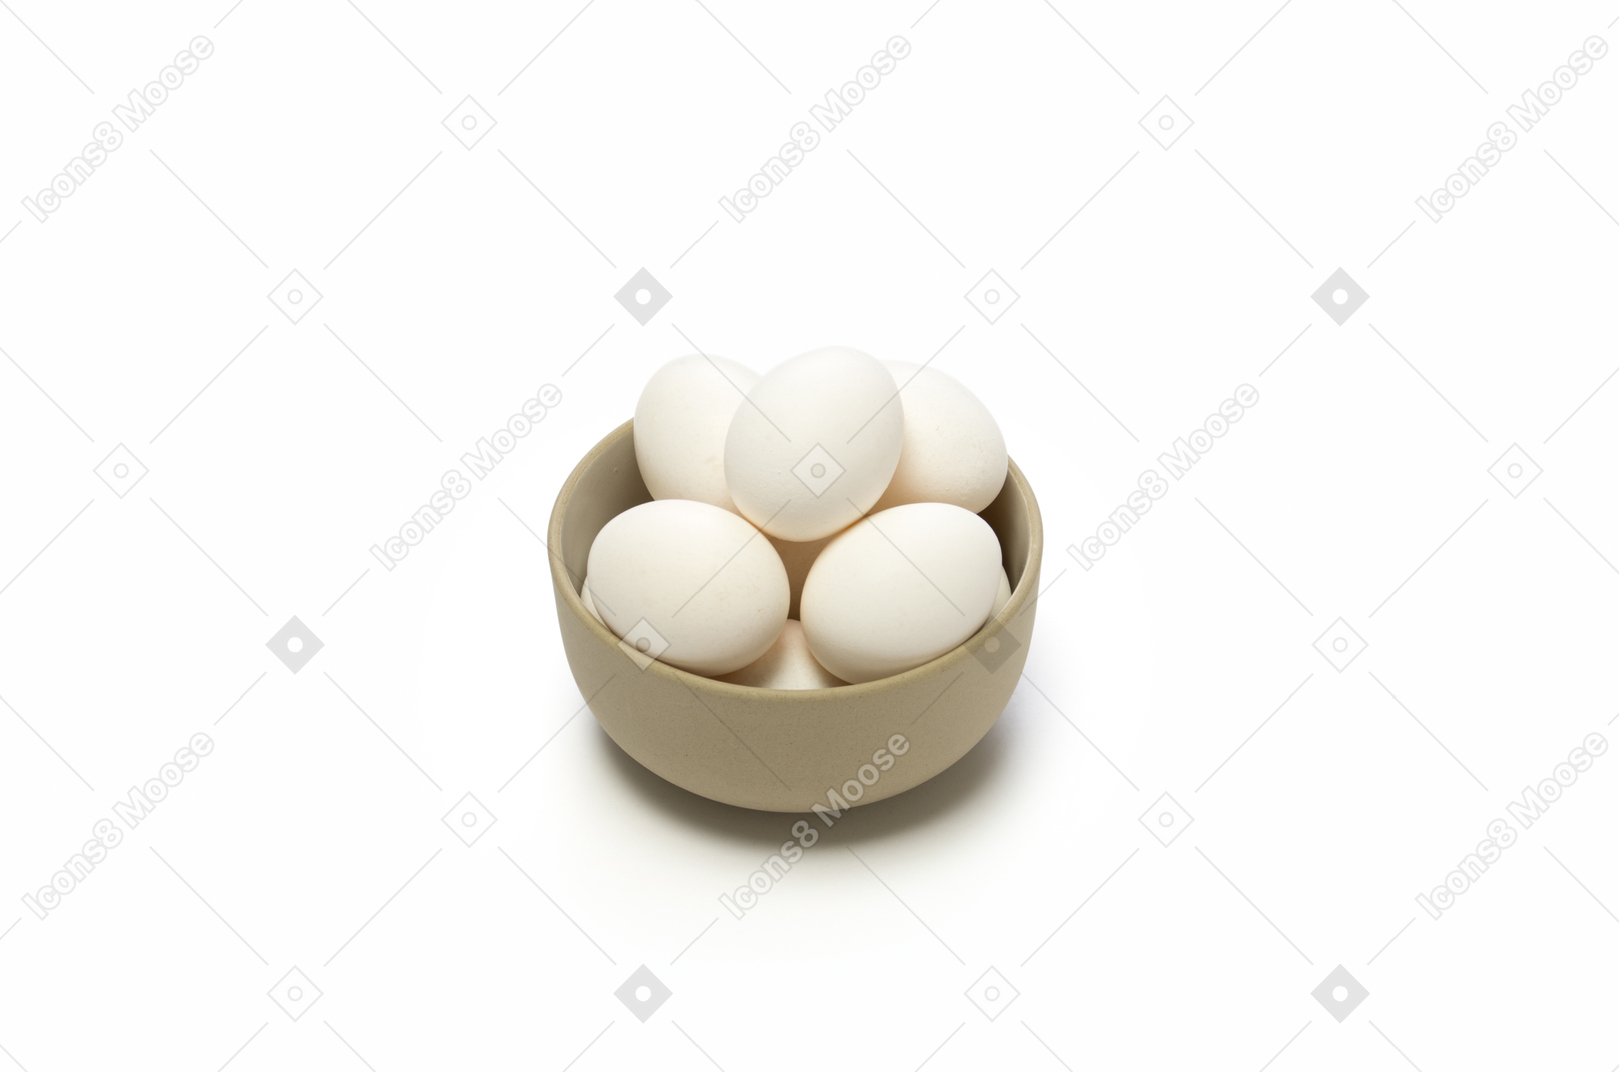 Bowl with white eggs